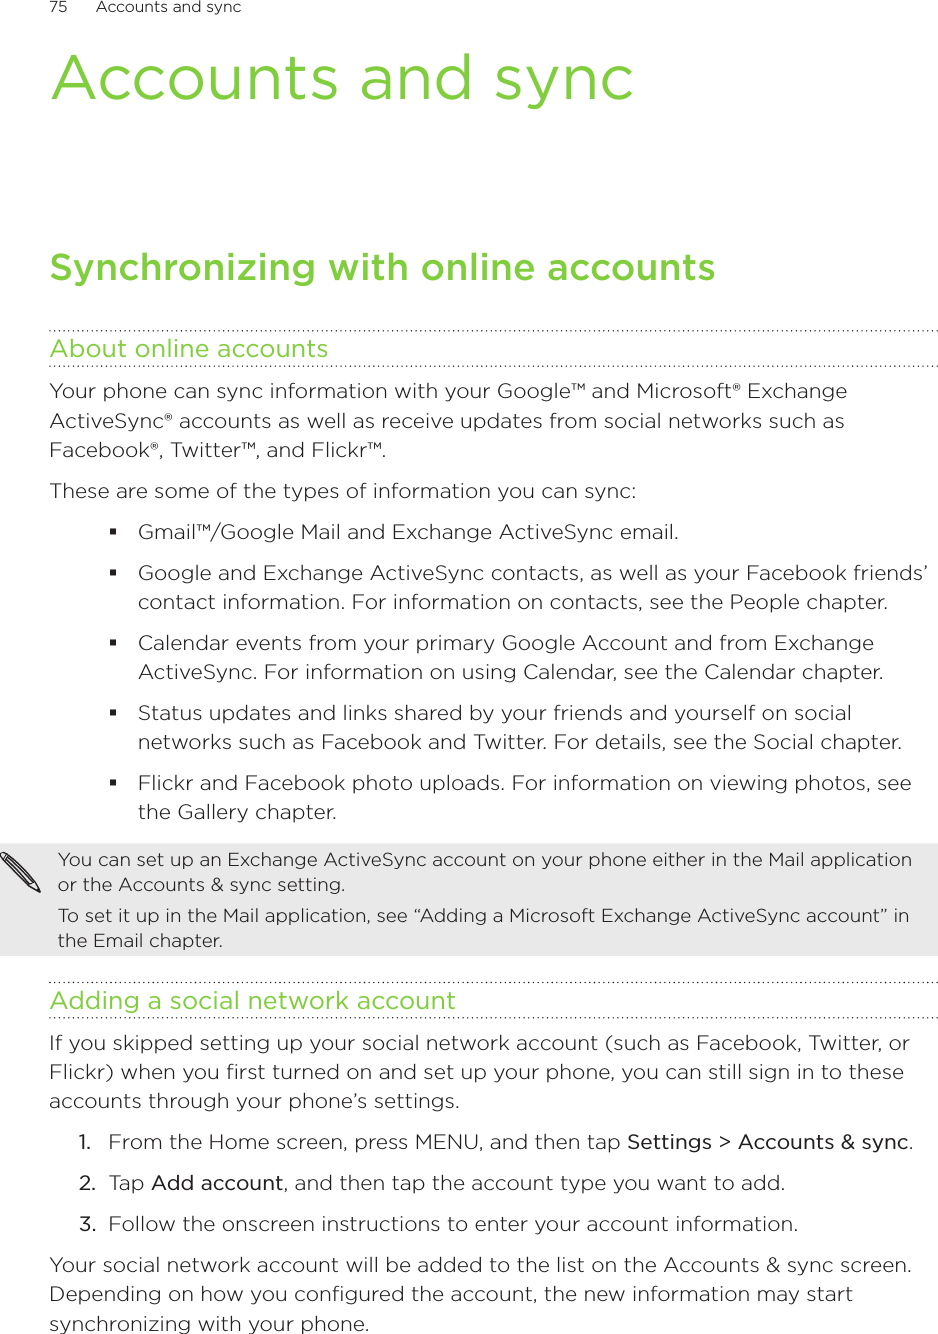 75      Accounts and sync      Accounts and syncSynchronizing with online accountsAbout online accountsYour phone can sync information with your Google™ and Microsoft® Exchange ActiveSync® accounts as well as receive updates from social networks such as Facebook®, Twitter™, and Flickr™.These are some of the types of information you can sync:Gmail™/Google Mail and Exchange ActiveSync email.Google and Exchange ActiveSync contacts, as well as your Facebook friends’ contact information. For information on contacts, see the People chapter.Calendar events from your primary Google Account and from Exchange ActiveSync. For information on using Calendar, see the Calendar chapter.Status updates and links shared by your friends and yourself on social networks such as Facebook and Twitter. For details, see the Social chapter.Flickr and Facebook photo uploads. For information on viewing photos, see the Gallery chapter.You can set up an Exchange ActiveSync account on your phone either in the Mail application or the Accounts &amp; sync setting.To set it up in the Mail application, see “Adding a Microsoft Exchange ActiveSync account” in the Email chapter.Adding a social network accountIf you skipped setting up your social network account (such as Facebook, Twitter, or Flickr) when you first turned on and set up your phone, you can still sign in to these accounts through your phone’s settings.From the Home screen, press MENU, and then tap Settings &gt; Accounts &amp; sync. Tap Add account, and then tap the account type you want to add.Follow the onscreen instructions to enter your account information.Your social network account will be added to the list on the Accounts &amp; sync screen. Depending on how you configured the account, the new information may start synchronizing with your phone.1.2.3.